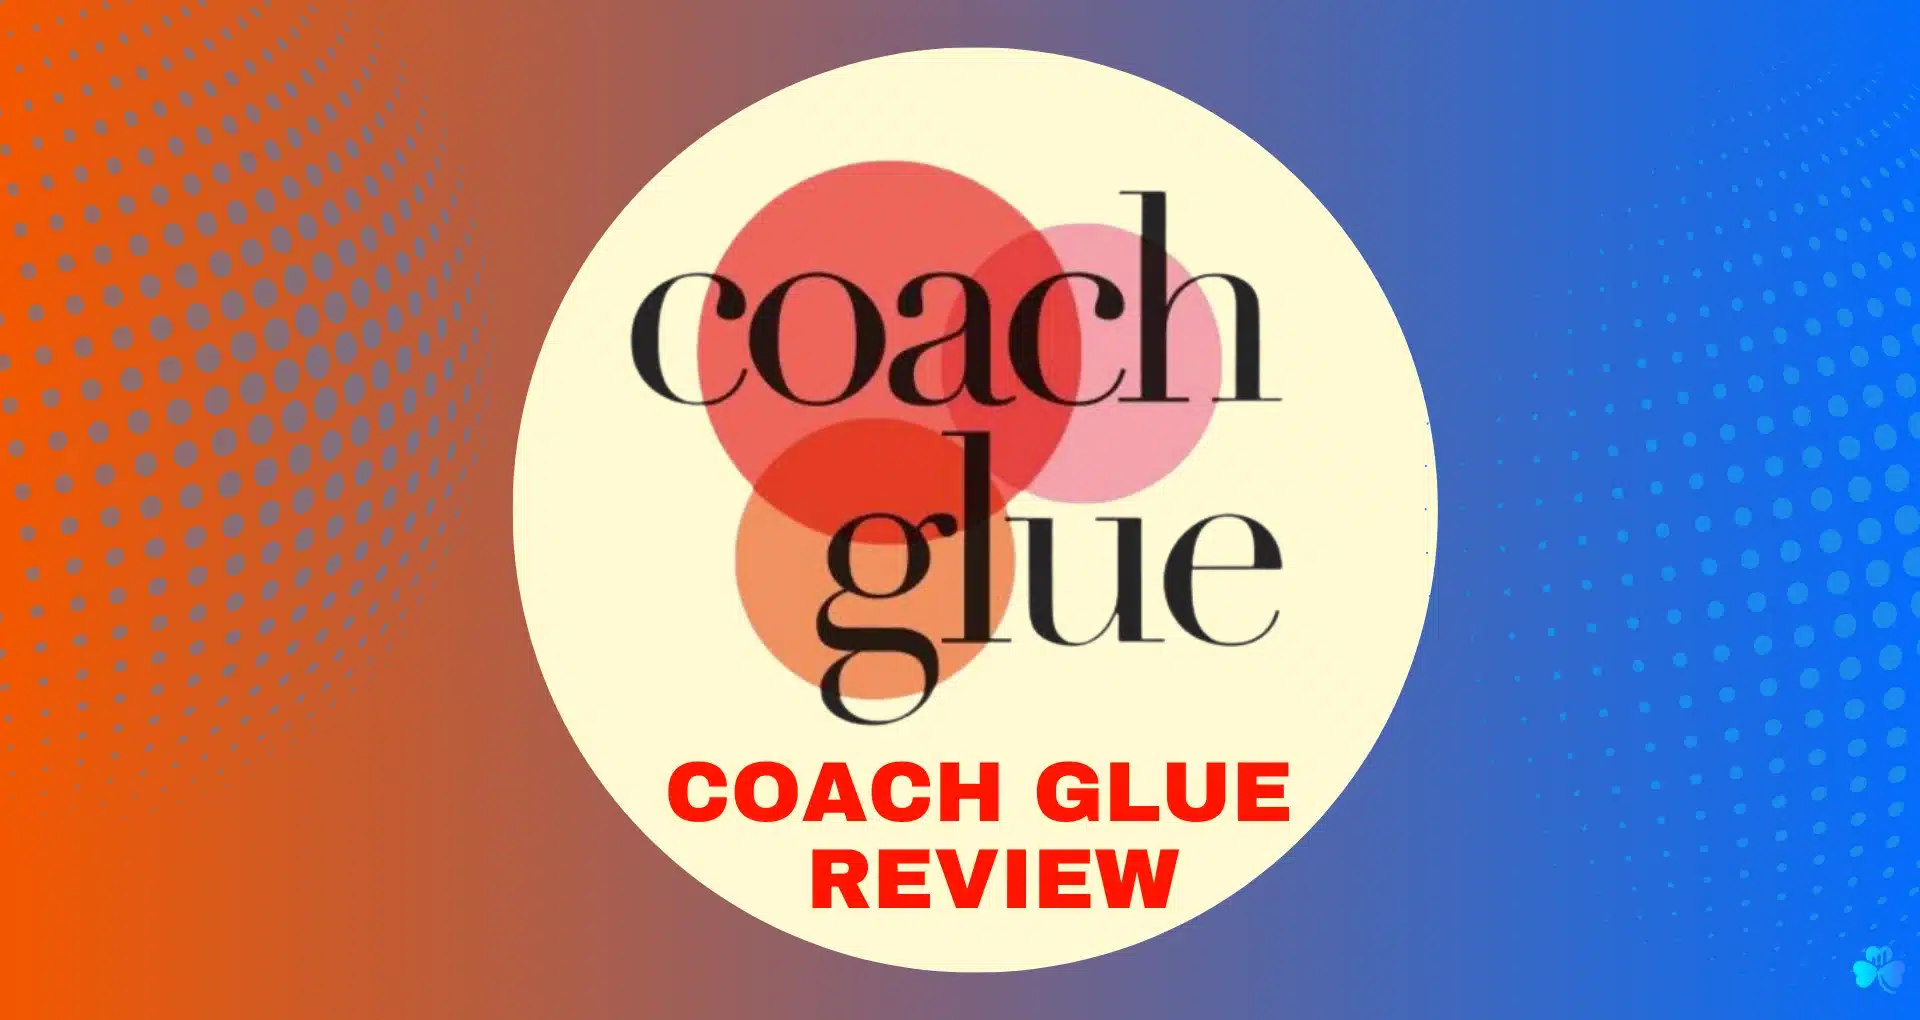 coach glue review featured image